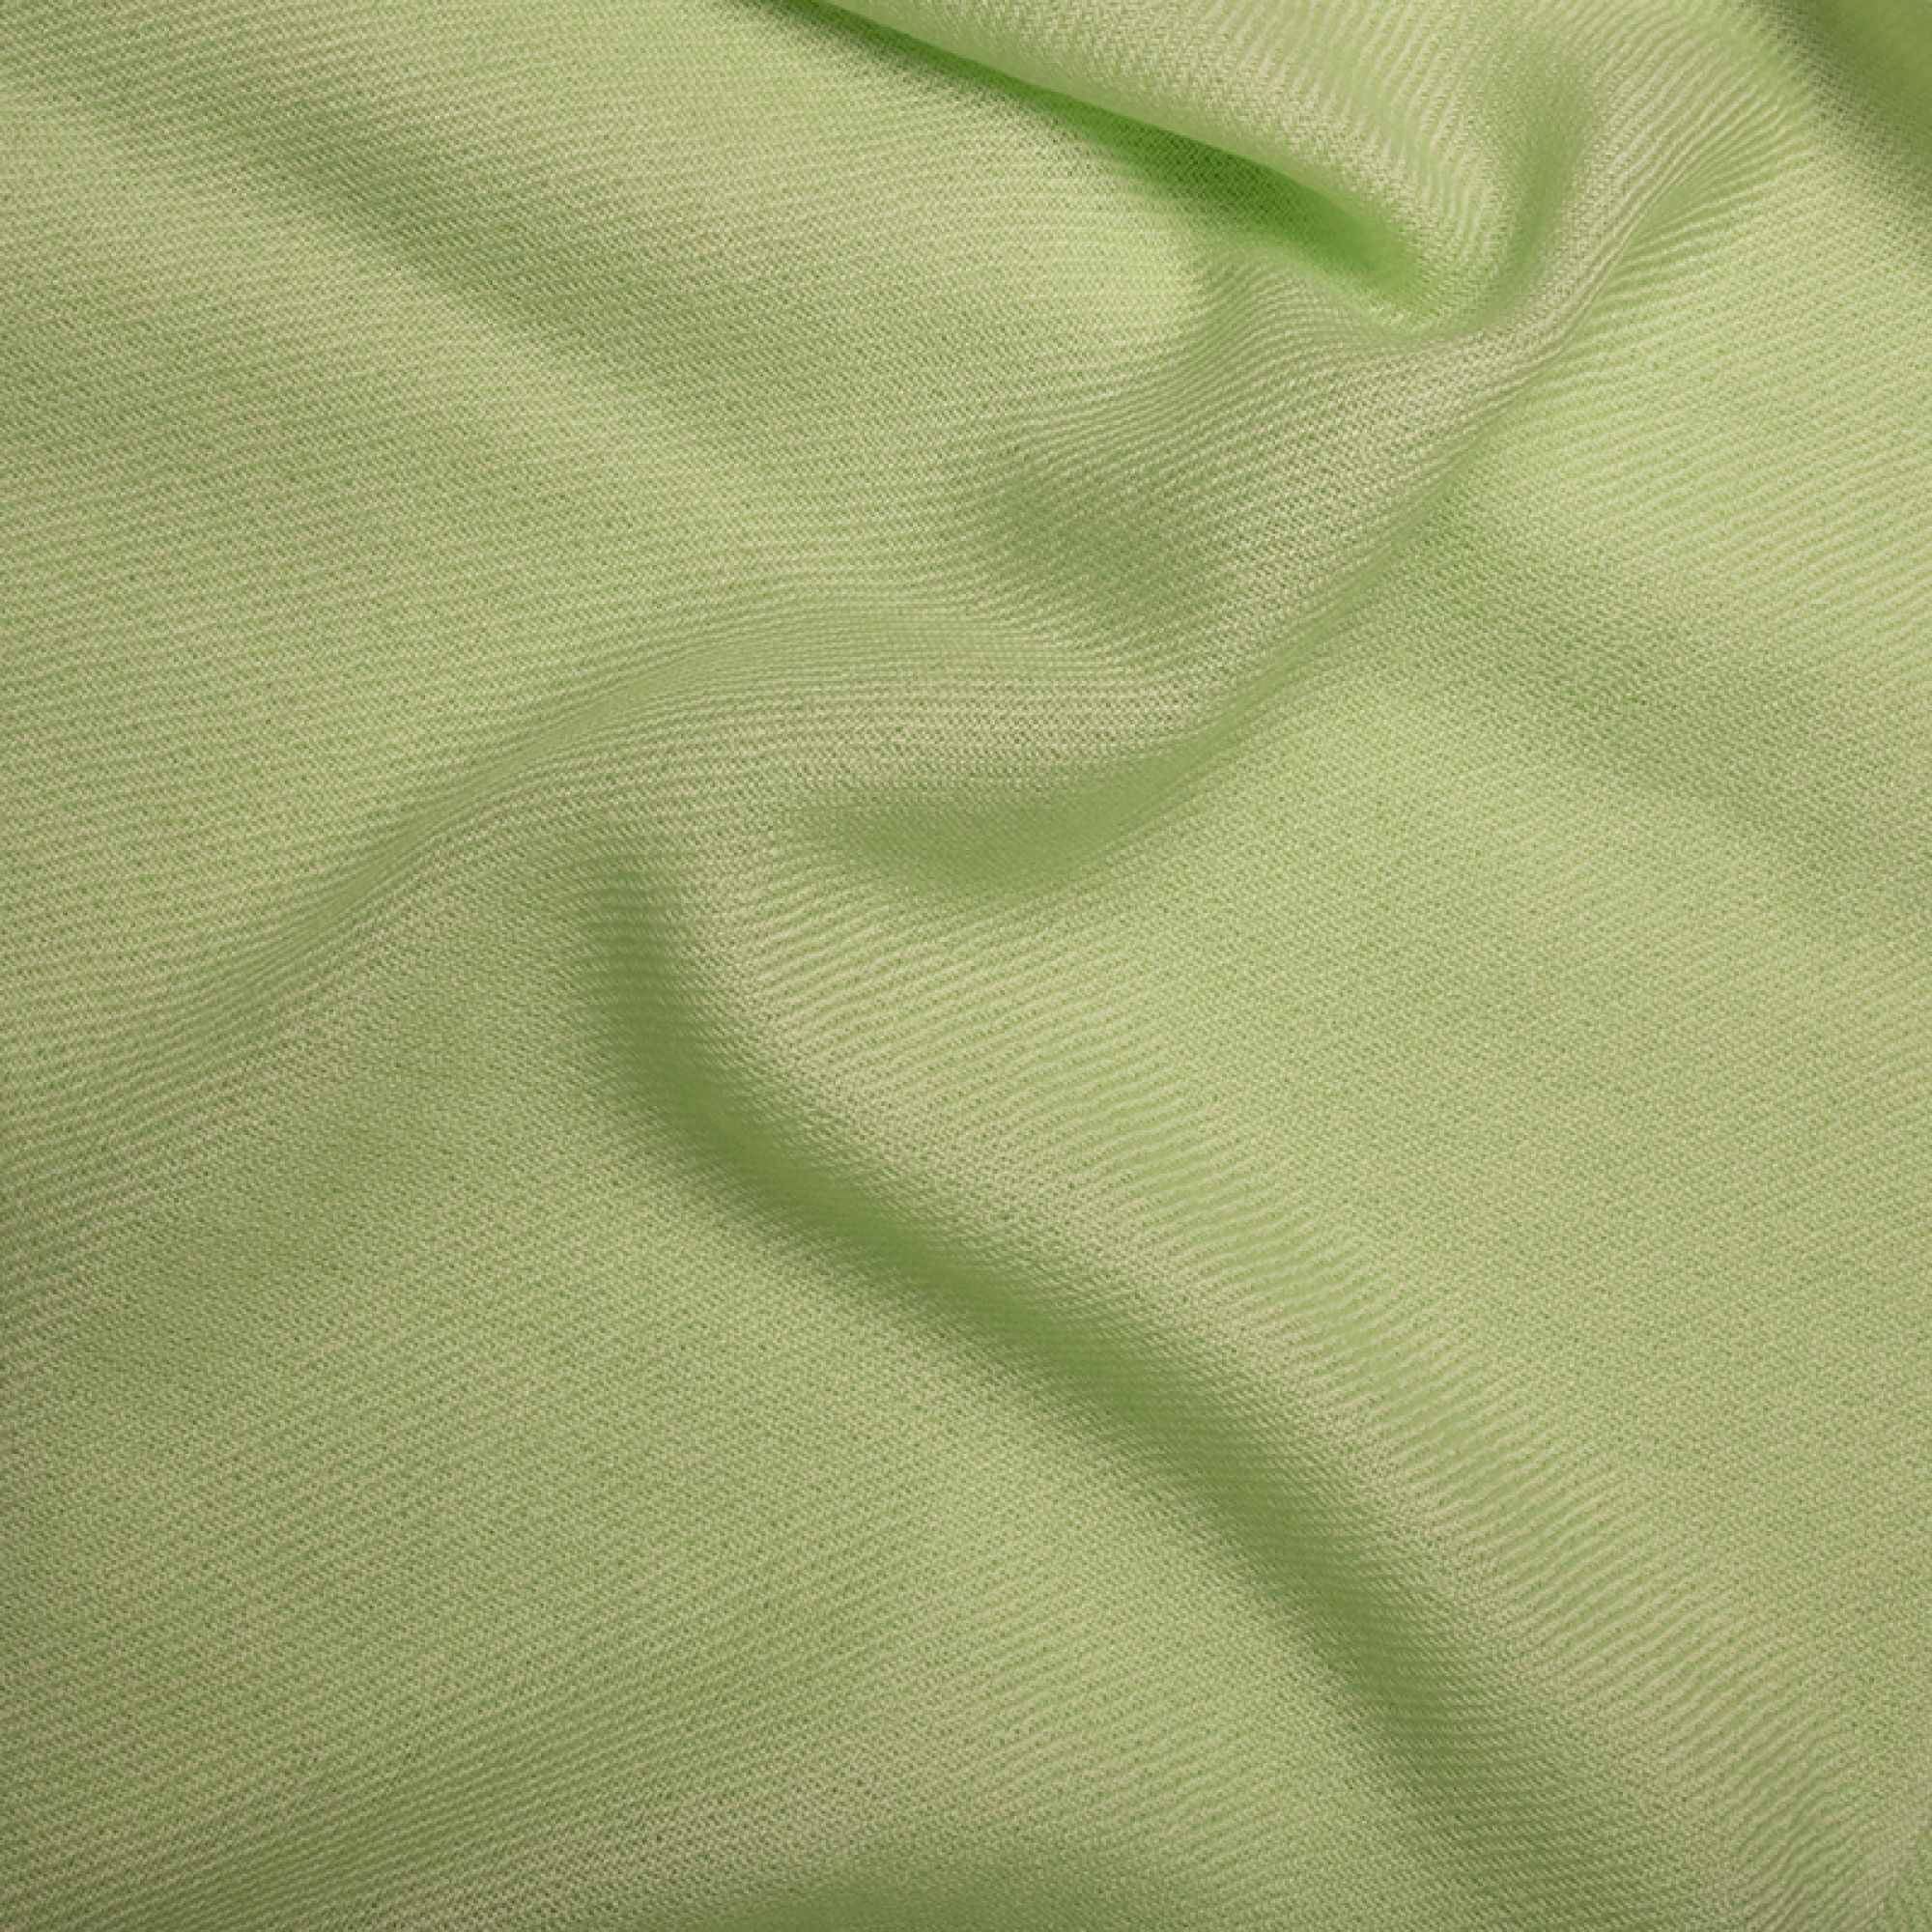 Cashmere accessories cocooning frisbi 147 x 203 lime green 147 x 203 cm